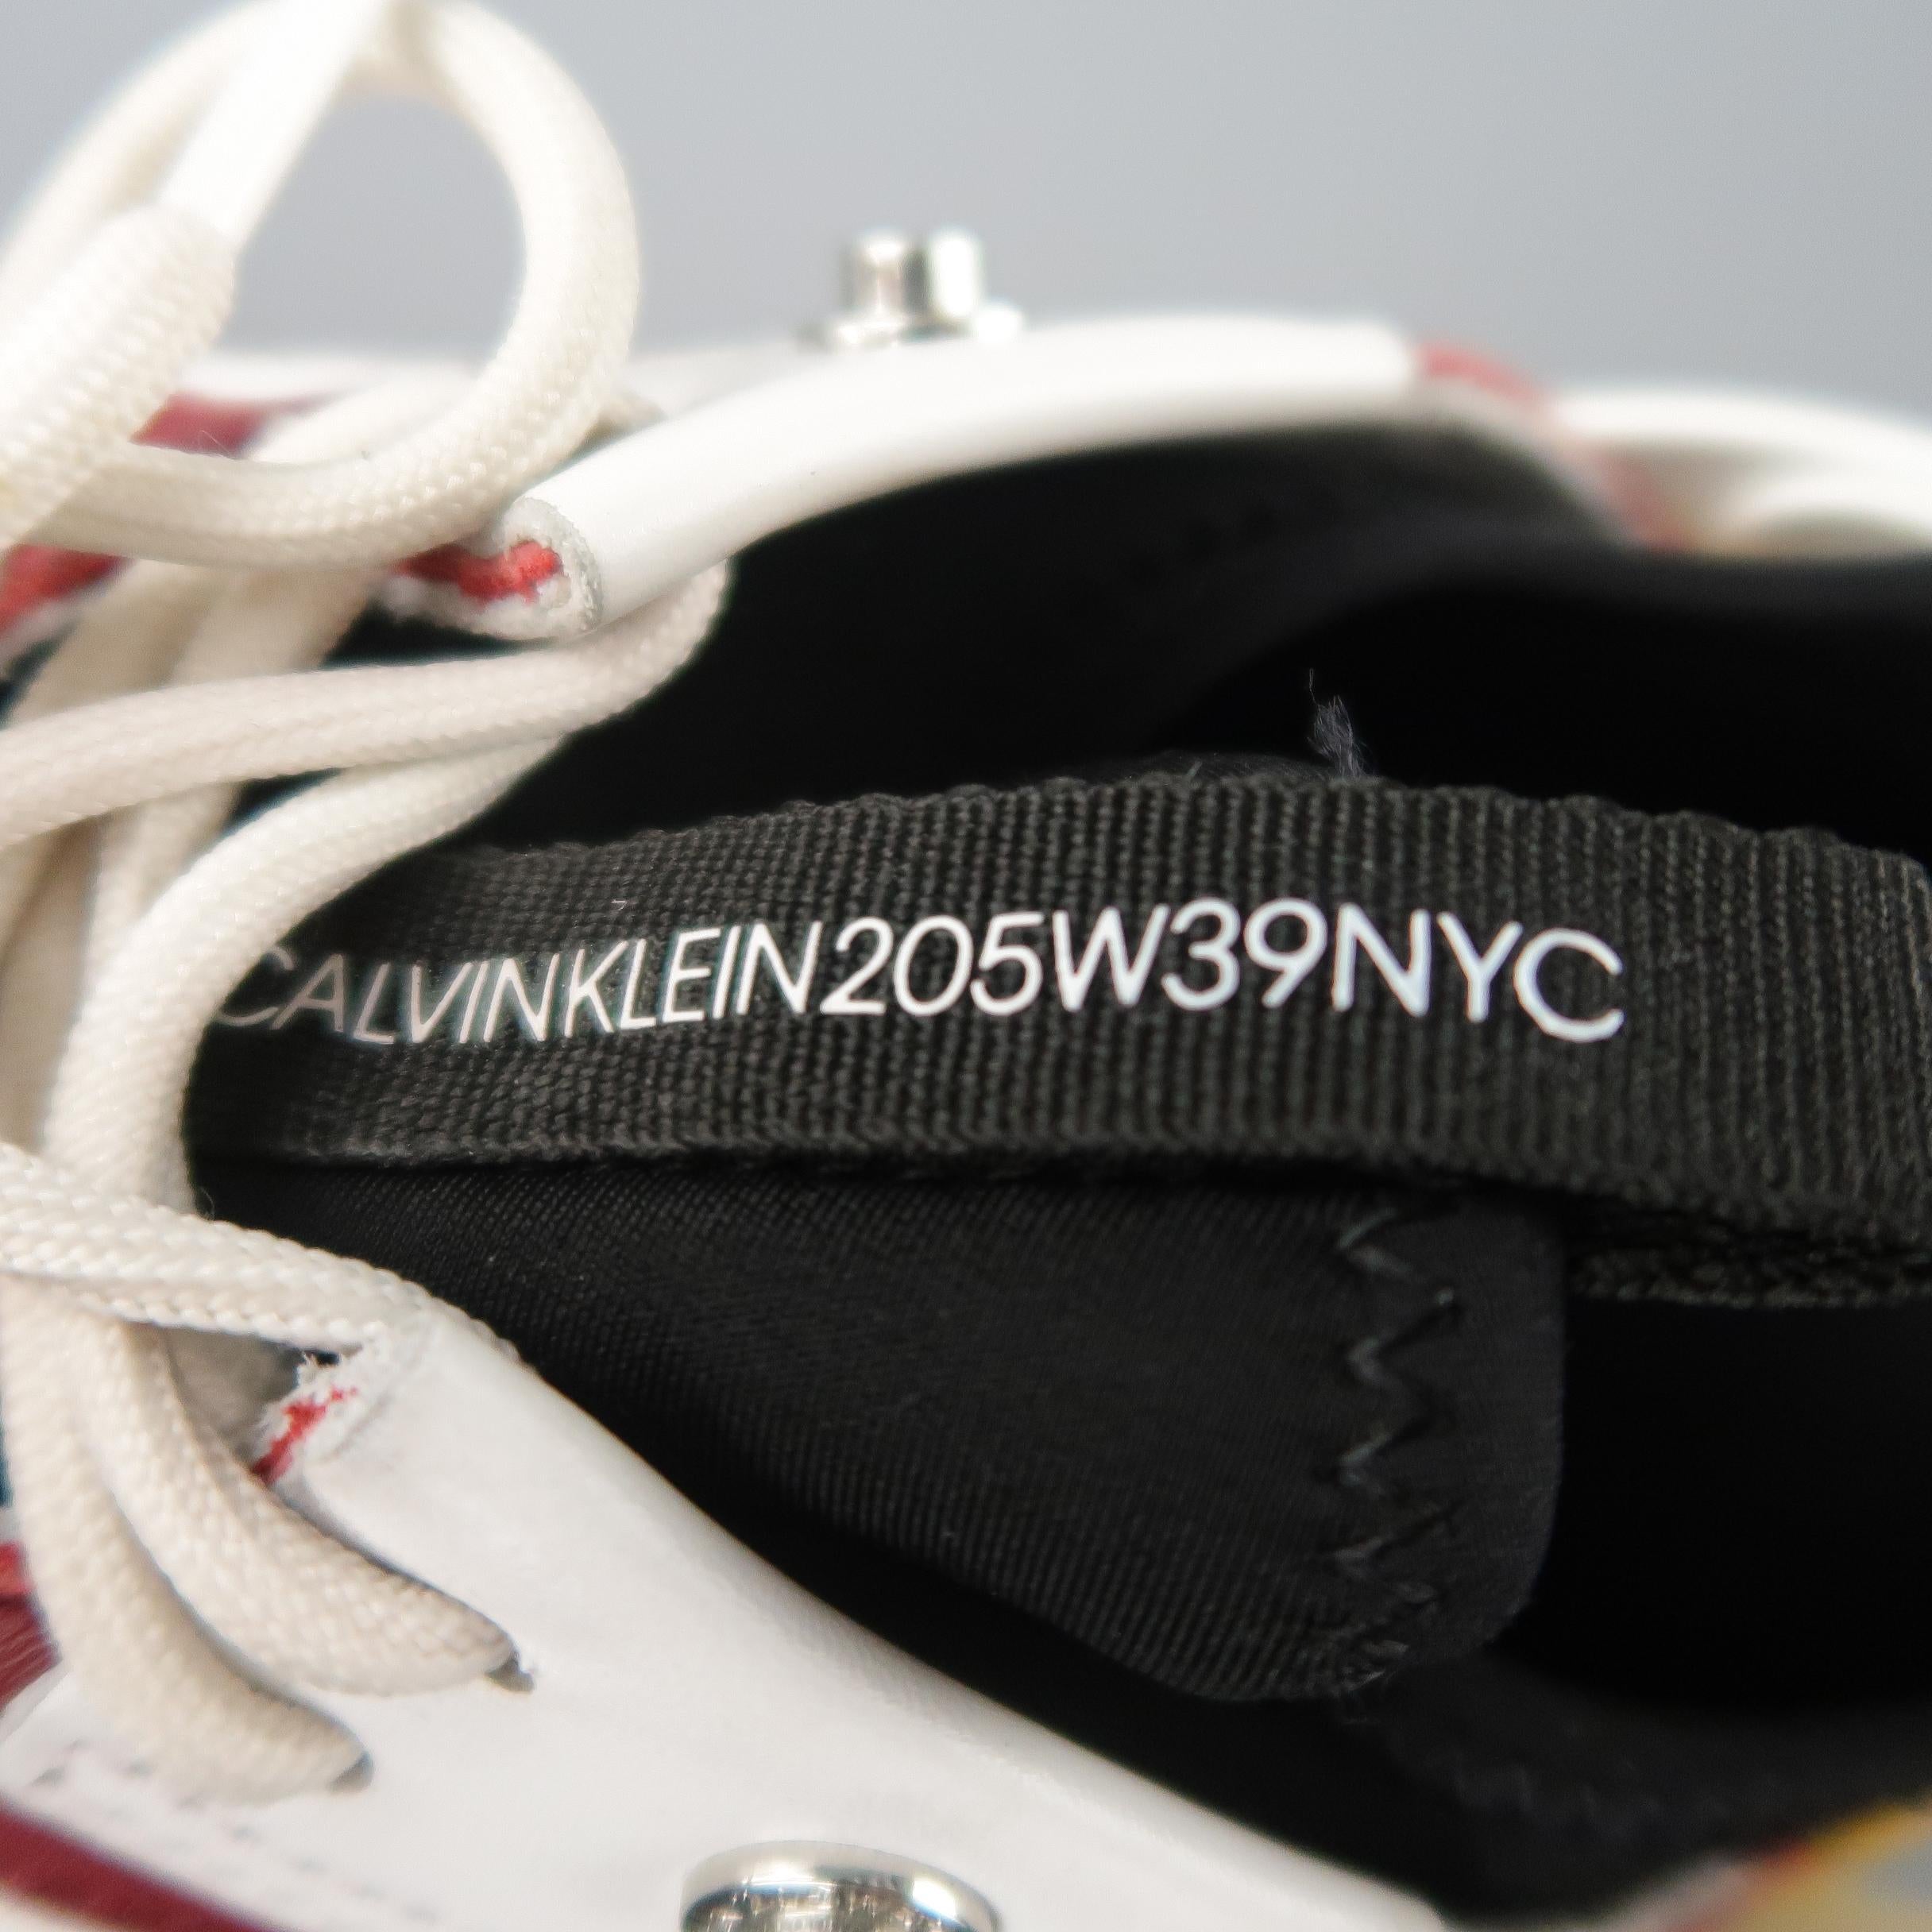 Men's CALVIN KLEIN 205W39NYC Size 10 White Color Block Leather Lace Up Sneakers $285.0